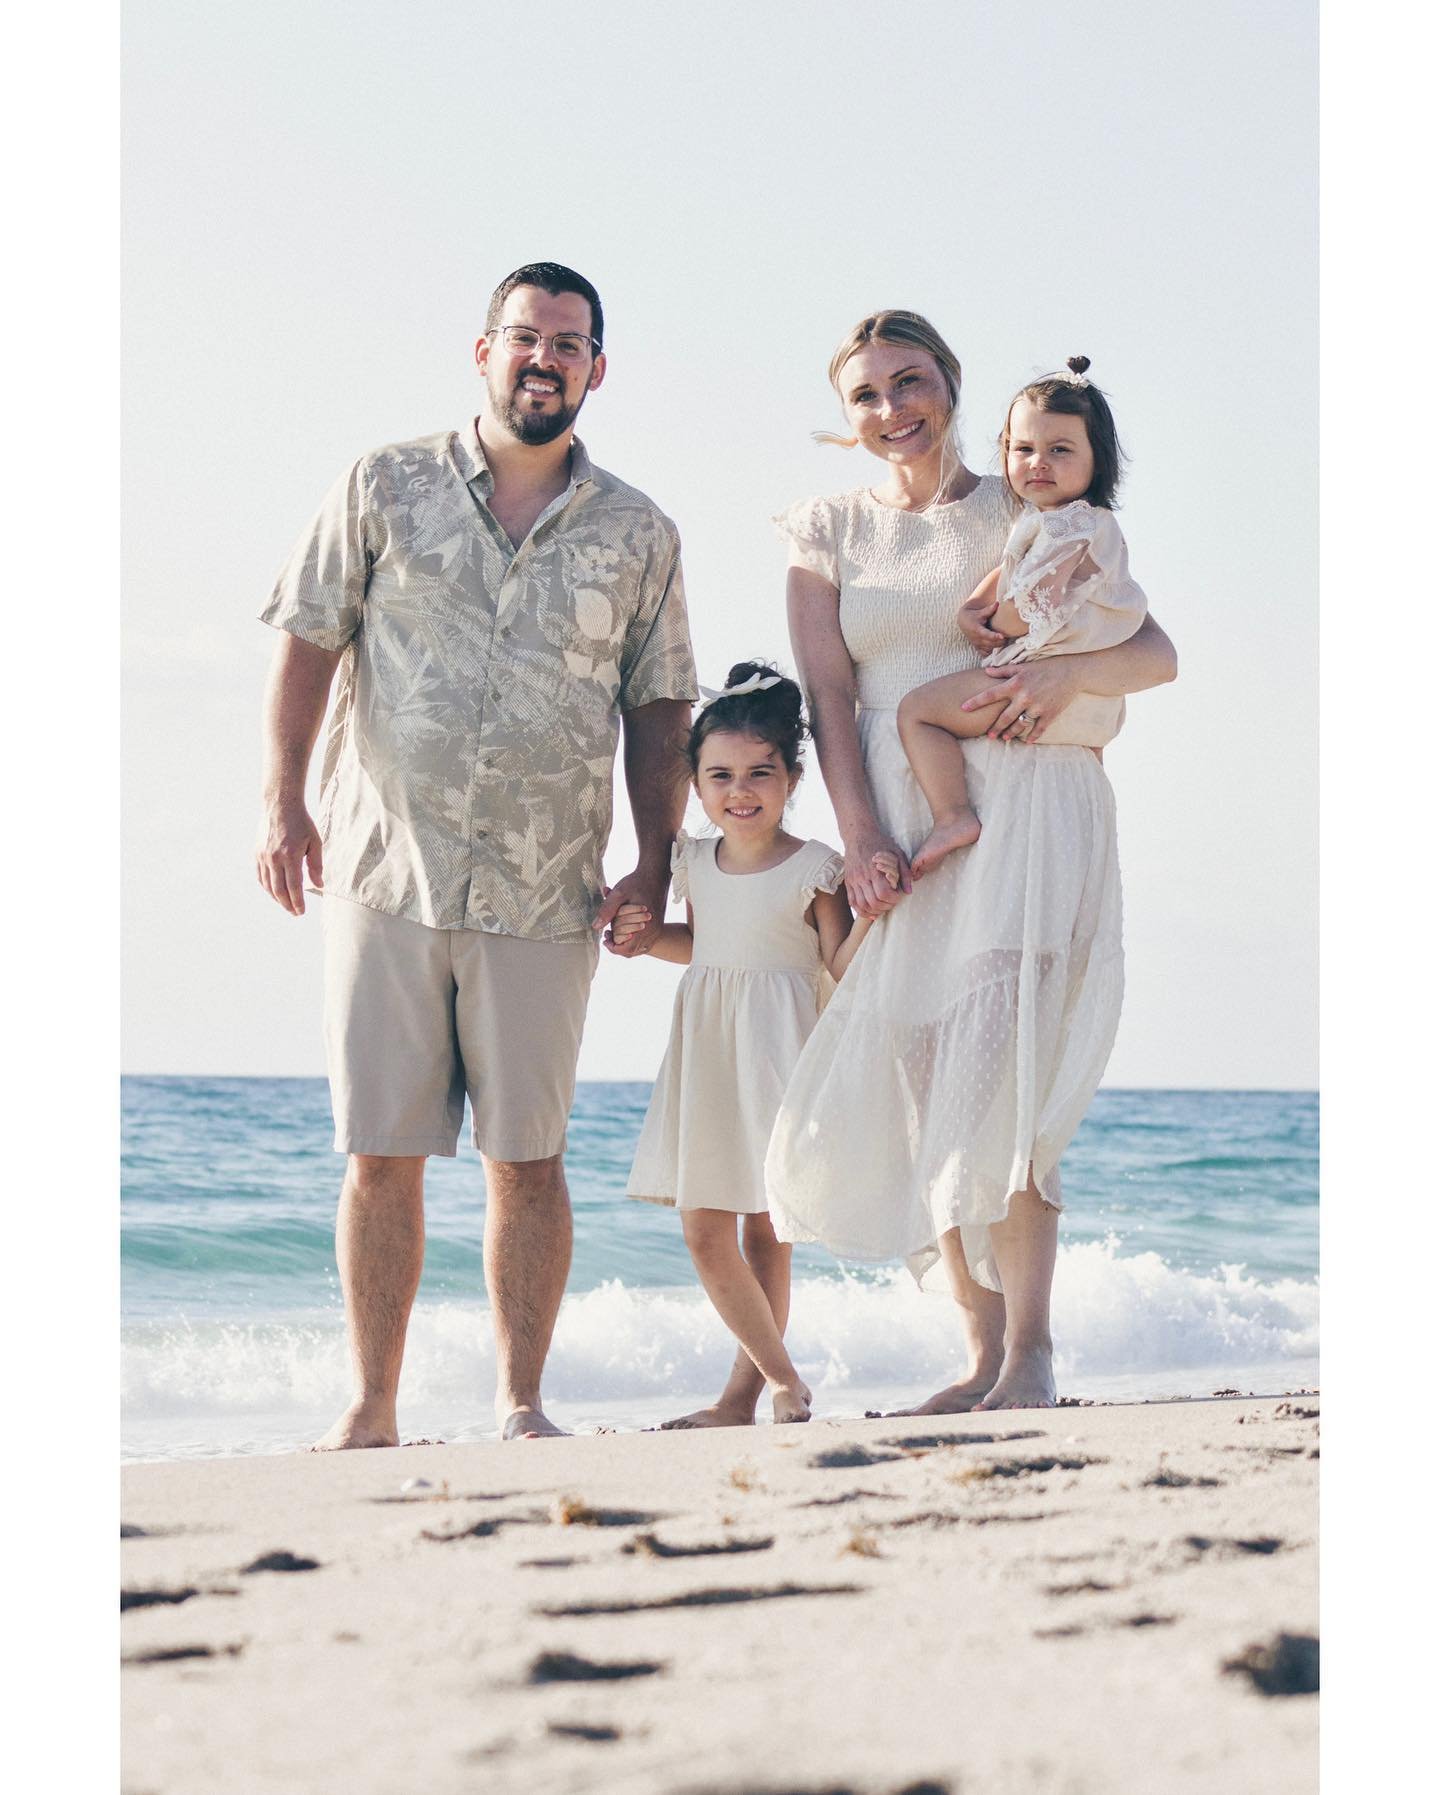 🐚 Family Photos - $50 off until June 1st! 

Send me a DM or email Dylan@DylanHughesPhotoVideo.com for booking and information. 

#familyphotography #familyphotographer #familyphotos #florida #southflorida #palmbeach #westpalmbeach #boca #bocaraton #